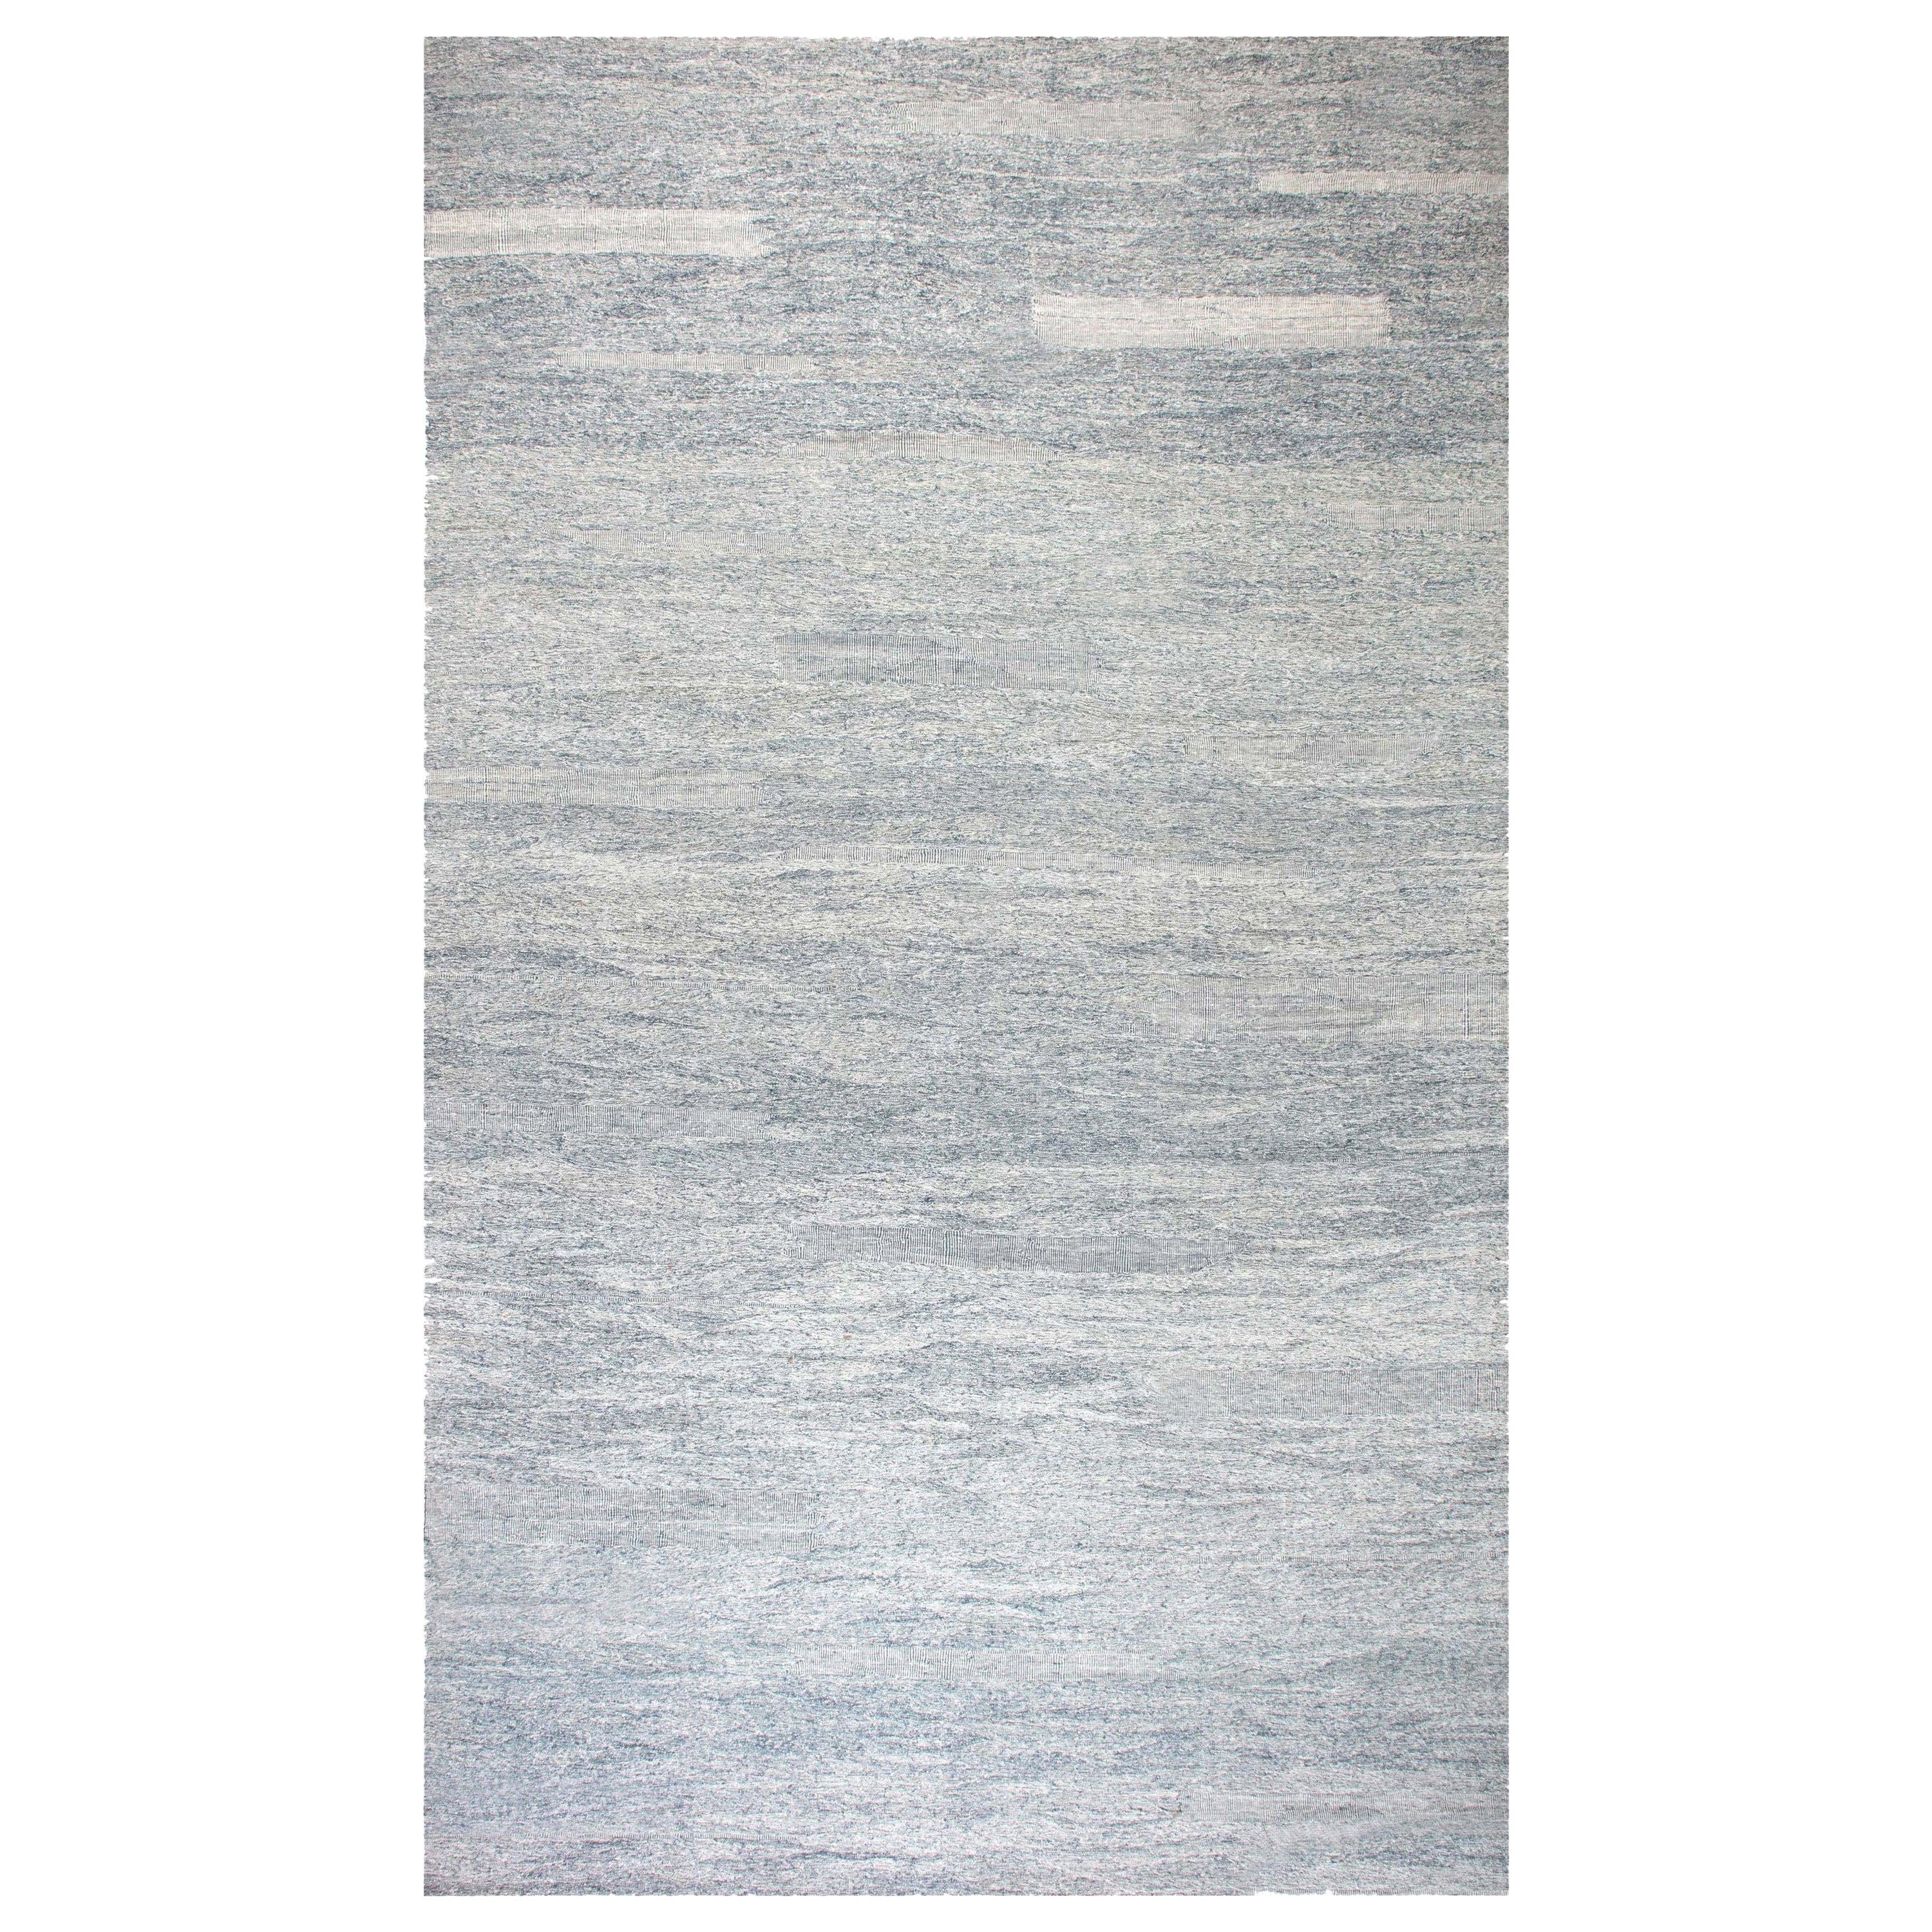 Contemporary Blue and White Flat-Weave Wool Rug by Doris Leslie Blau